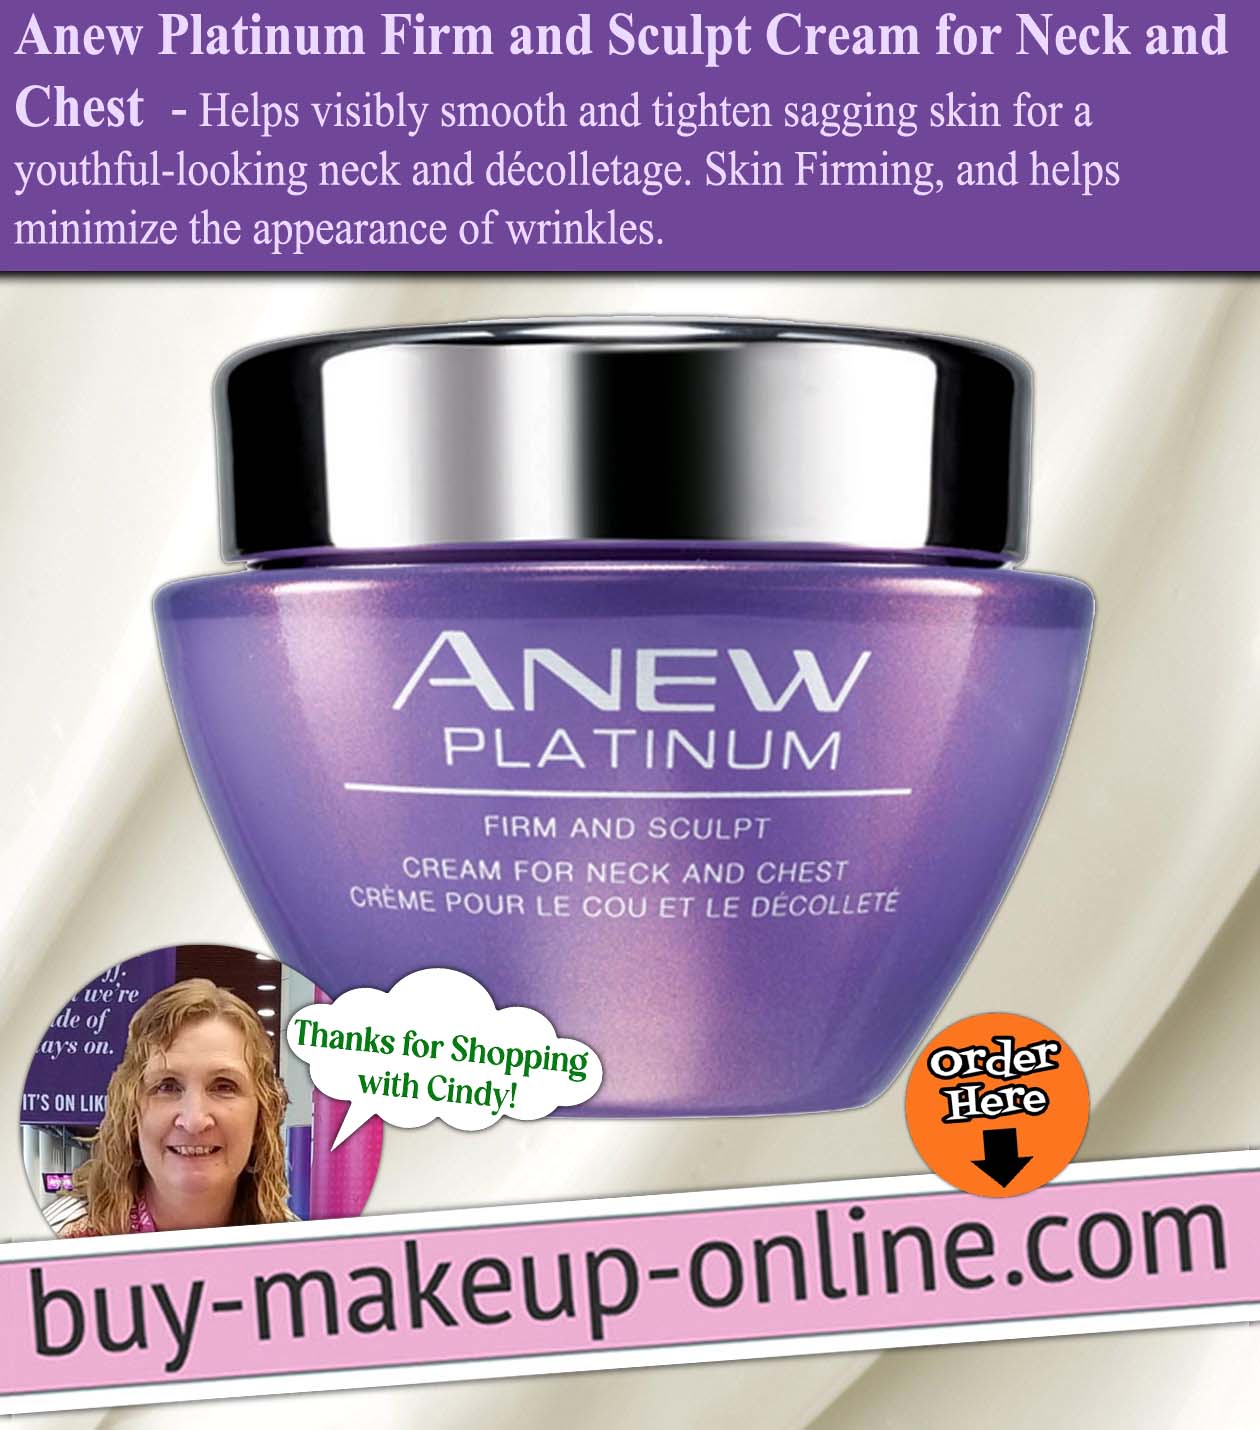 AVON Anew Platinum Firm and Sculpt Cream for Neck and Chest 